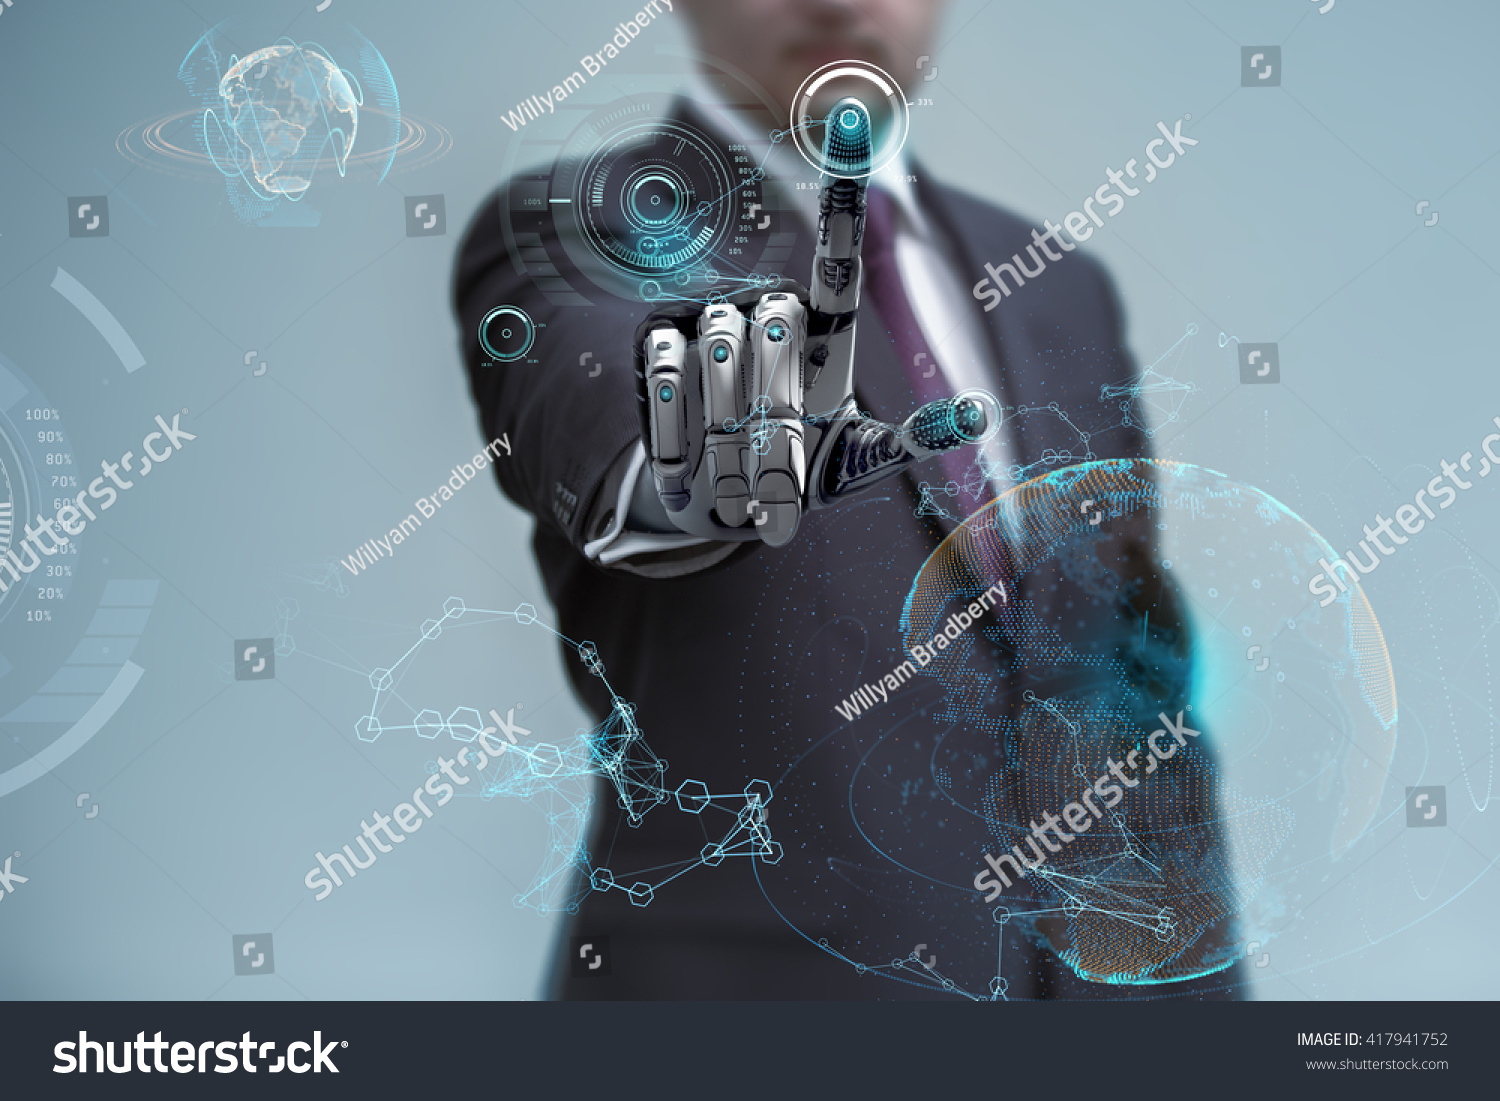 businessman operating virtual hud interface and manipulating elements with robotic hand. Blue holographic screen artificial design concept. #417941752